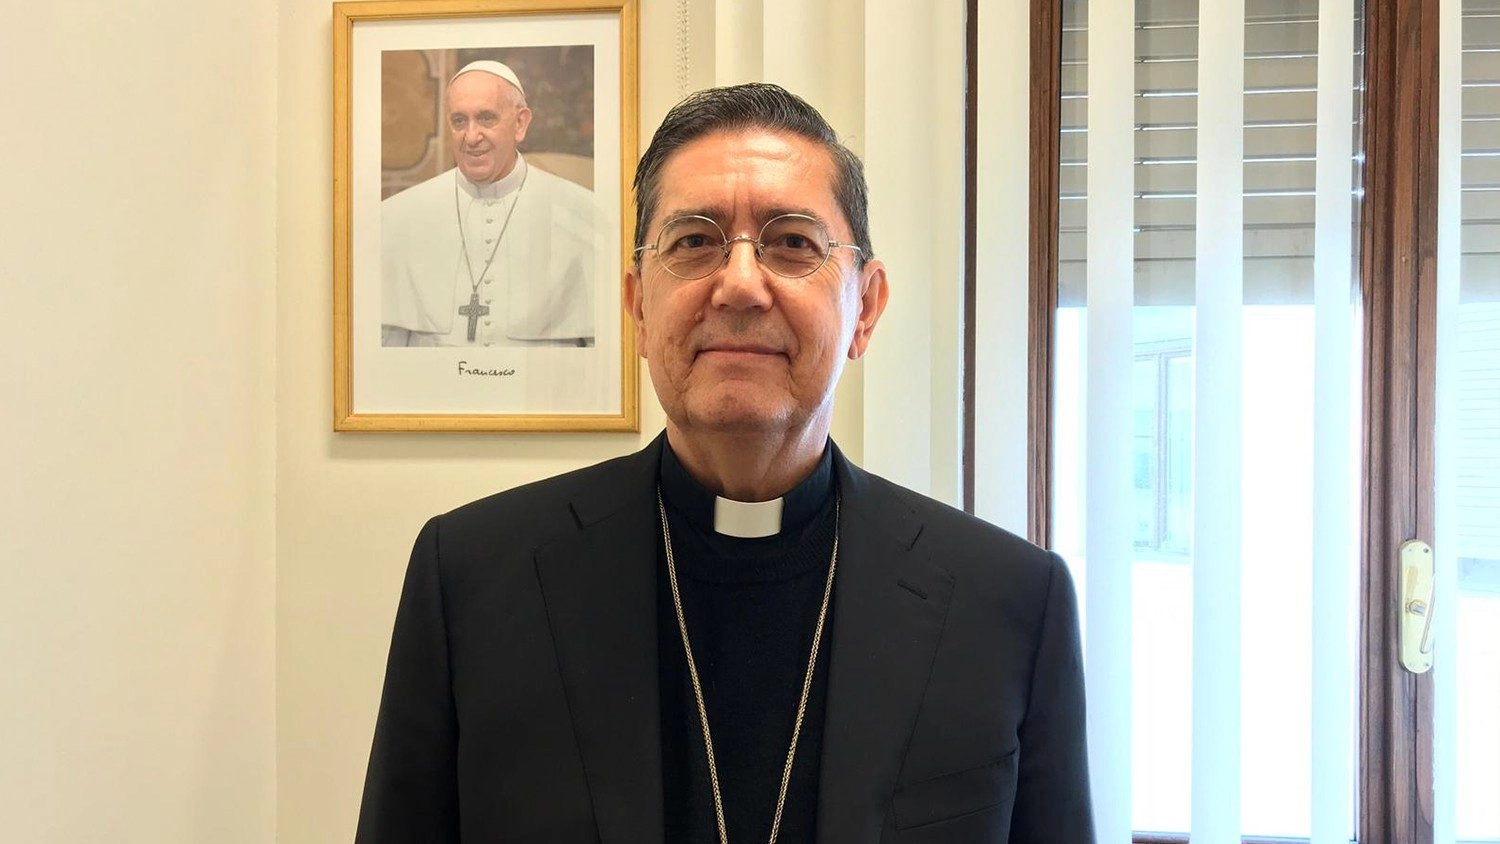 Bishop Miguel Ángel Ayuso Guixot, the new President of the Pontifical Council for Interreligious Dialogue